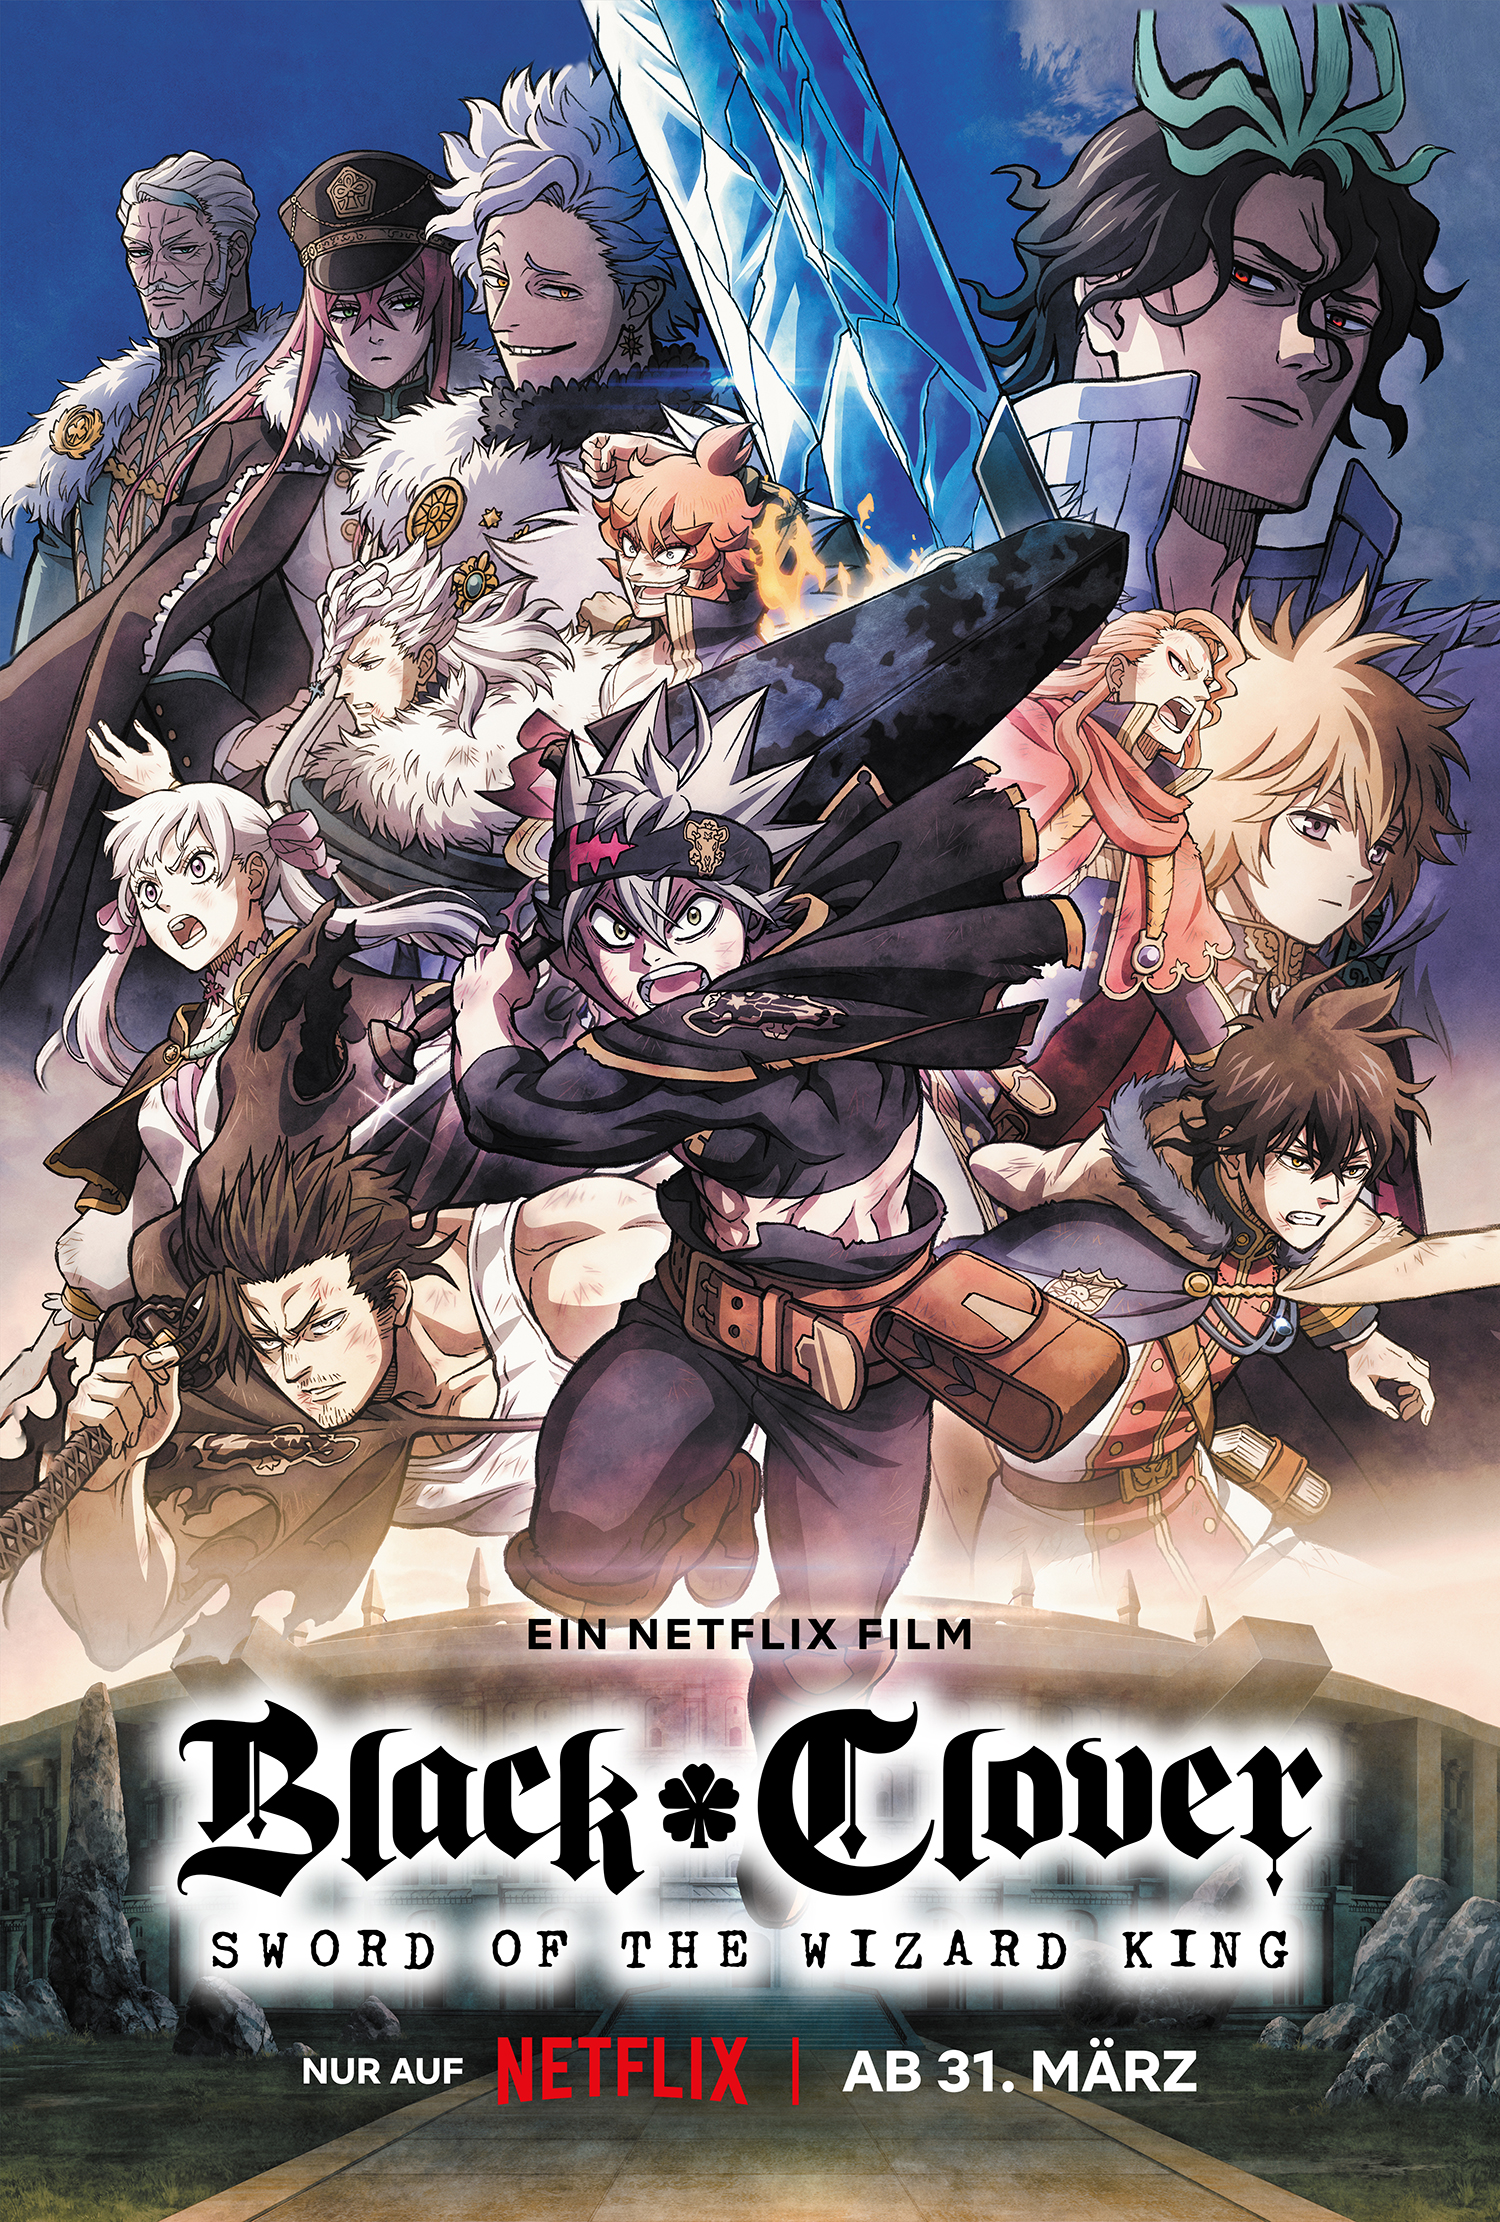 Black Clover Sword of the Wizard King release date synopsis and more